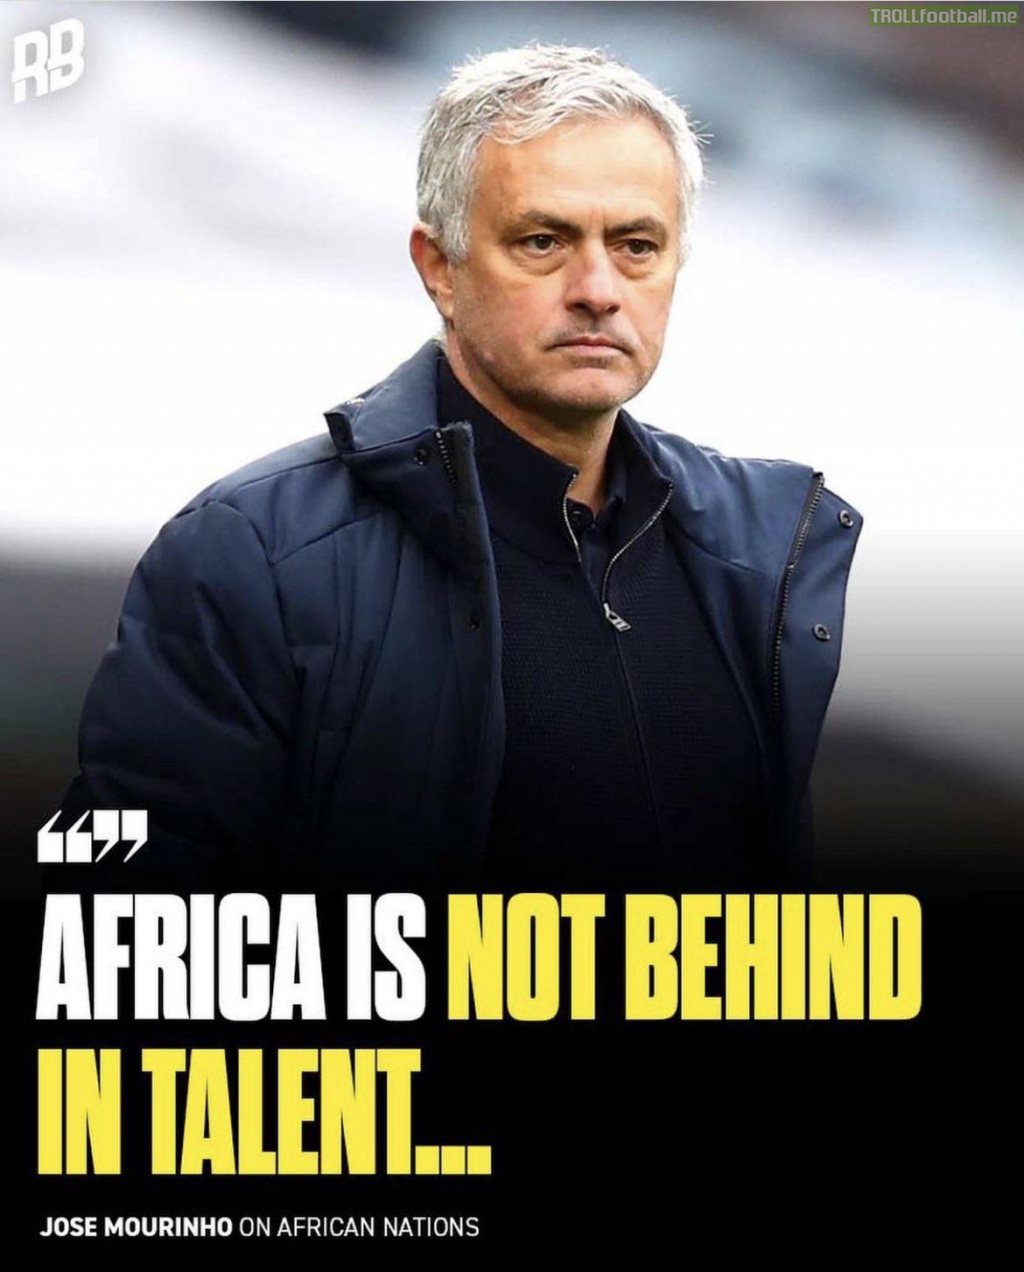 [RB] “Jose Mourinho wants FIFA to stop African players from representing other countries other than that of their origin. He believes once this is done, Africa countries would start winning the World Cup.”